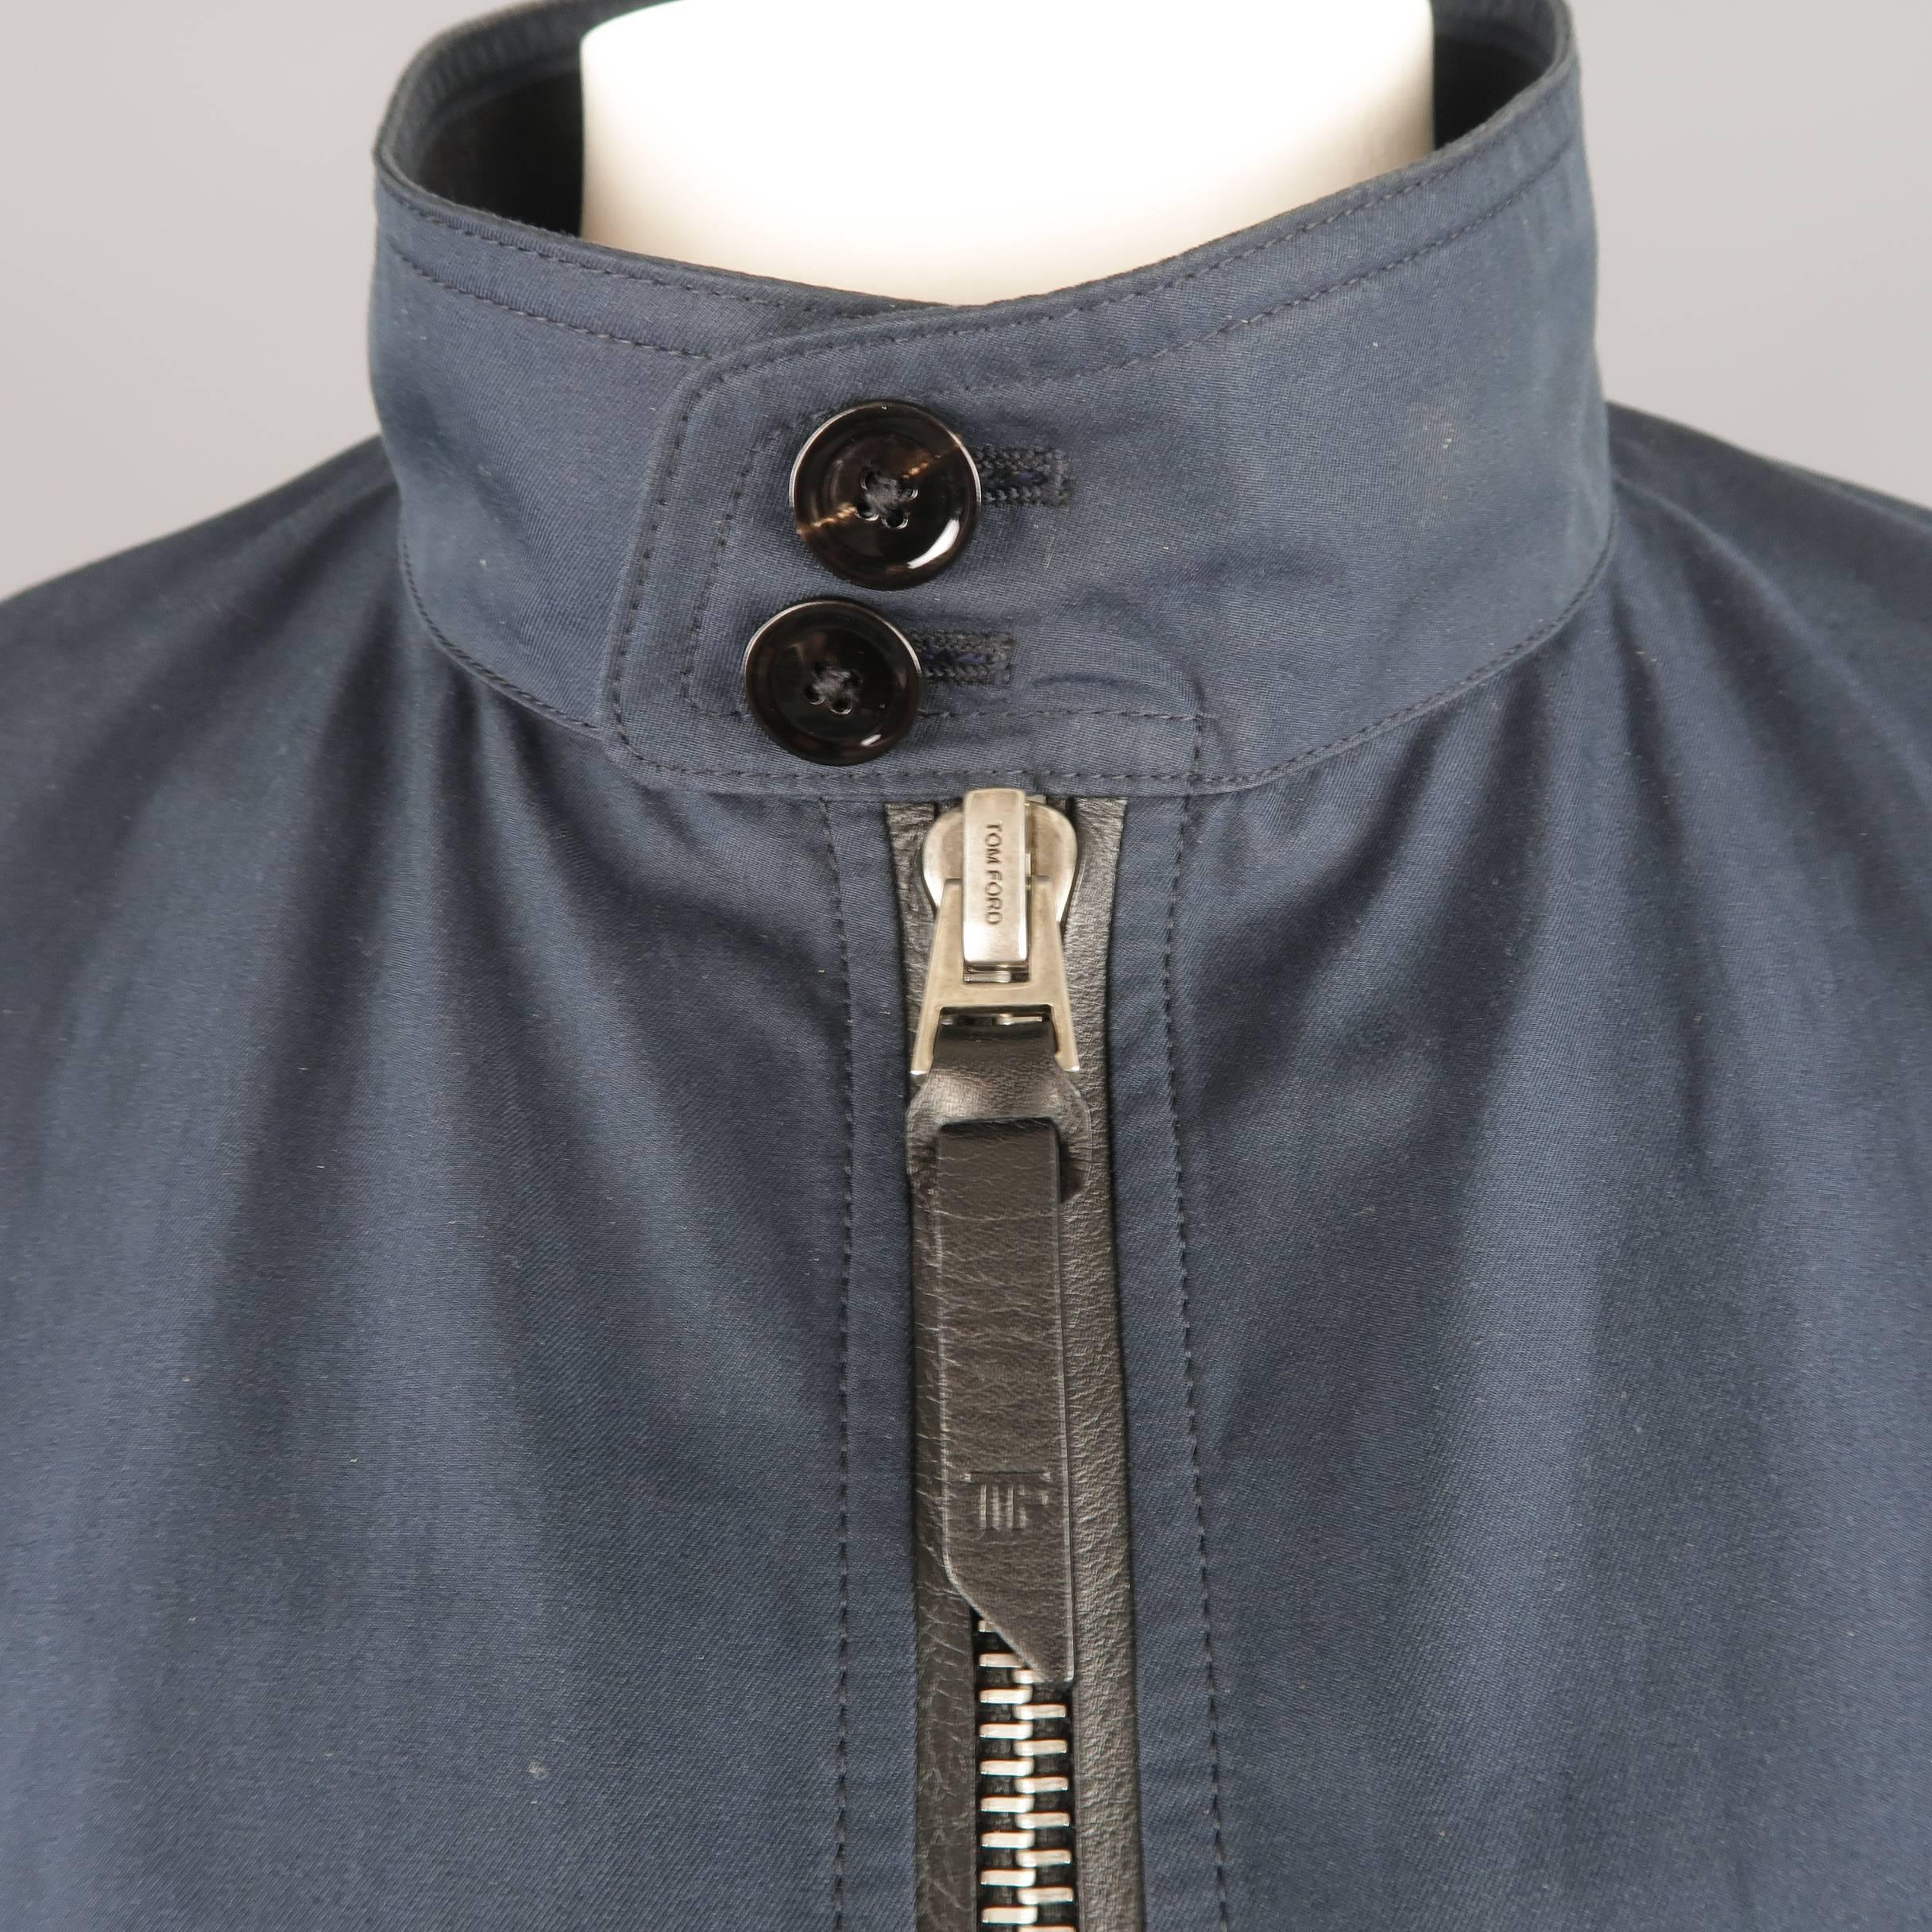 Tom Ford bomber jacket comes in muted navy blue cotton twill with a stand up button tab collar, leather trimmed silver tone double zip front with tab, slanted flap pockets, ribbed knit cuffs and hem , and plaid liner. Made in Italy.
 
Good Pre-Owned